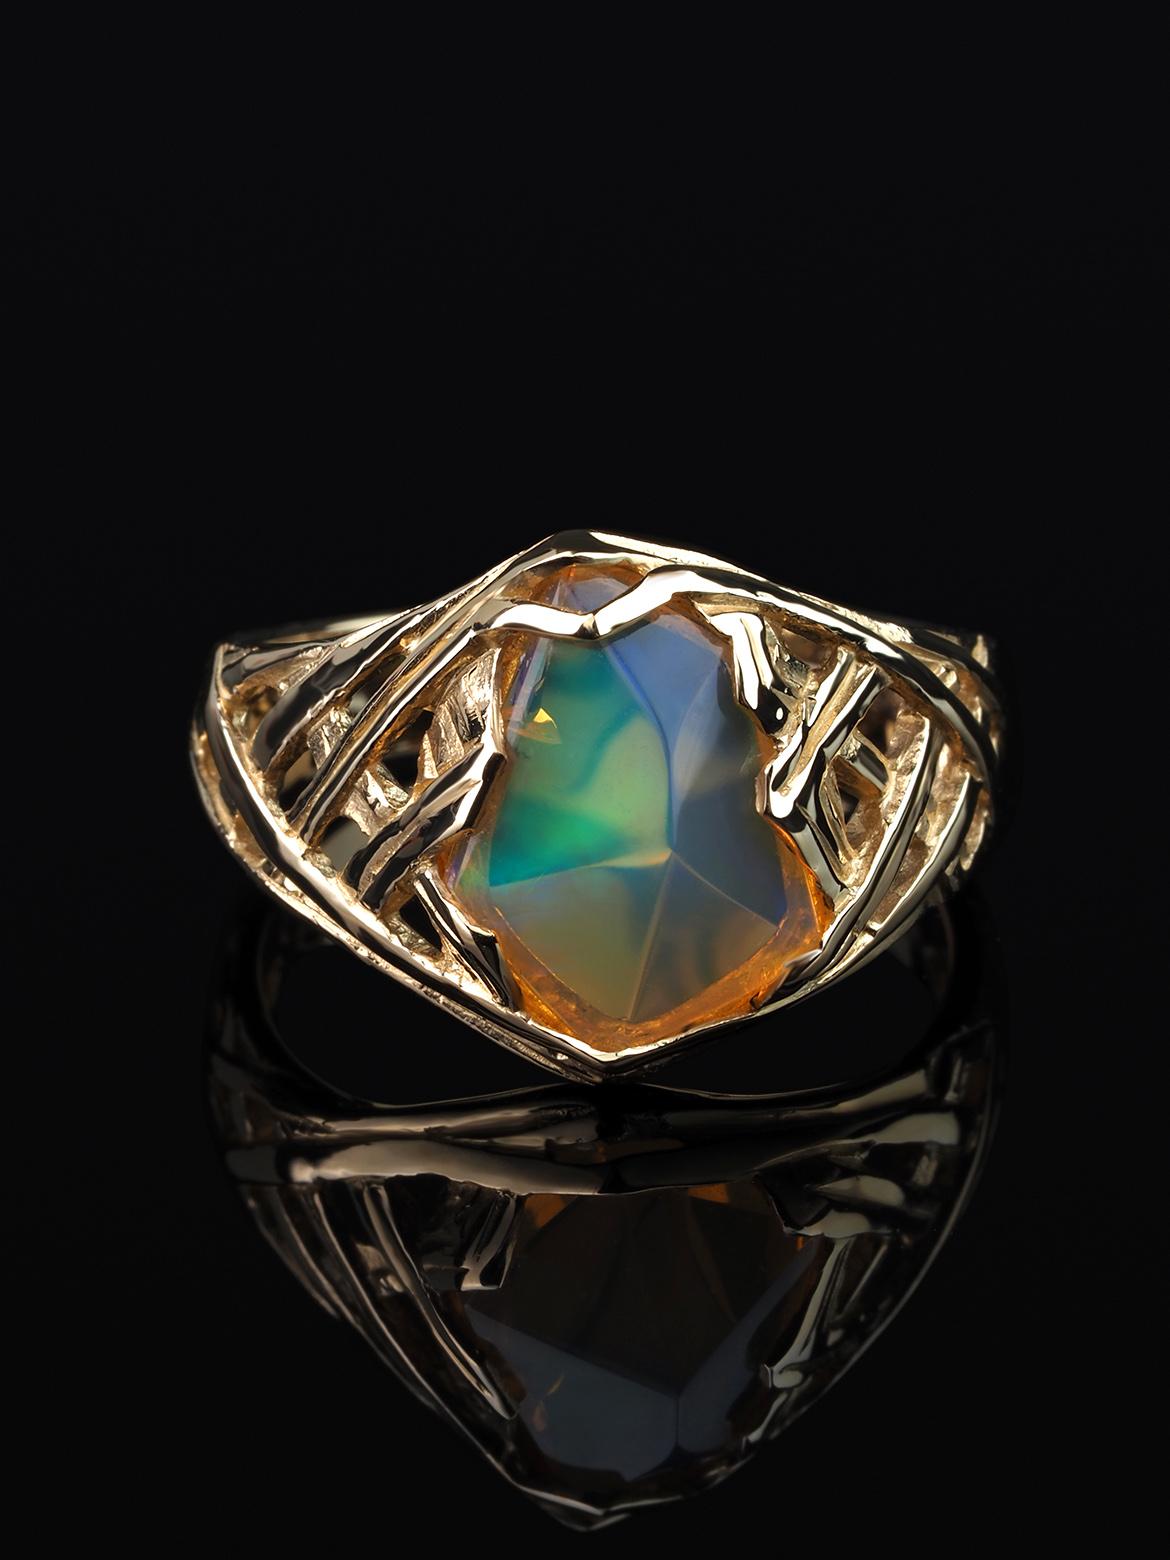 14K yellow gold ring with natural Opal
opal origin - Ethiopia  
opal measurements - 0.16 х 0.35 х 0.43 in / 4 х 9 х 11 mm
opal weight - 1.52 carats
ring size - 6.5 US
ring weight - 4.26 grams


We ship our jewelry worldwide – for our customers it is